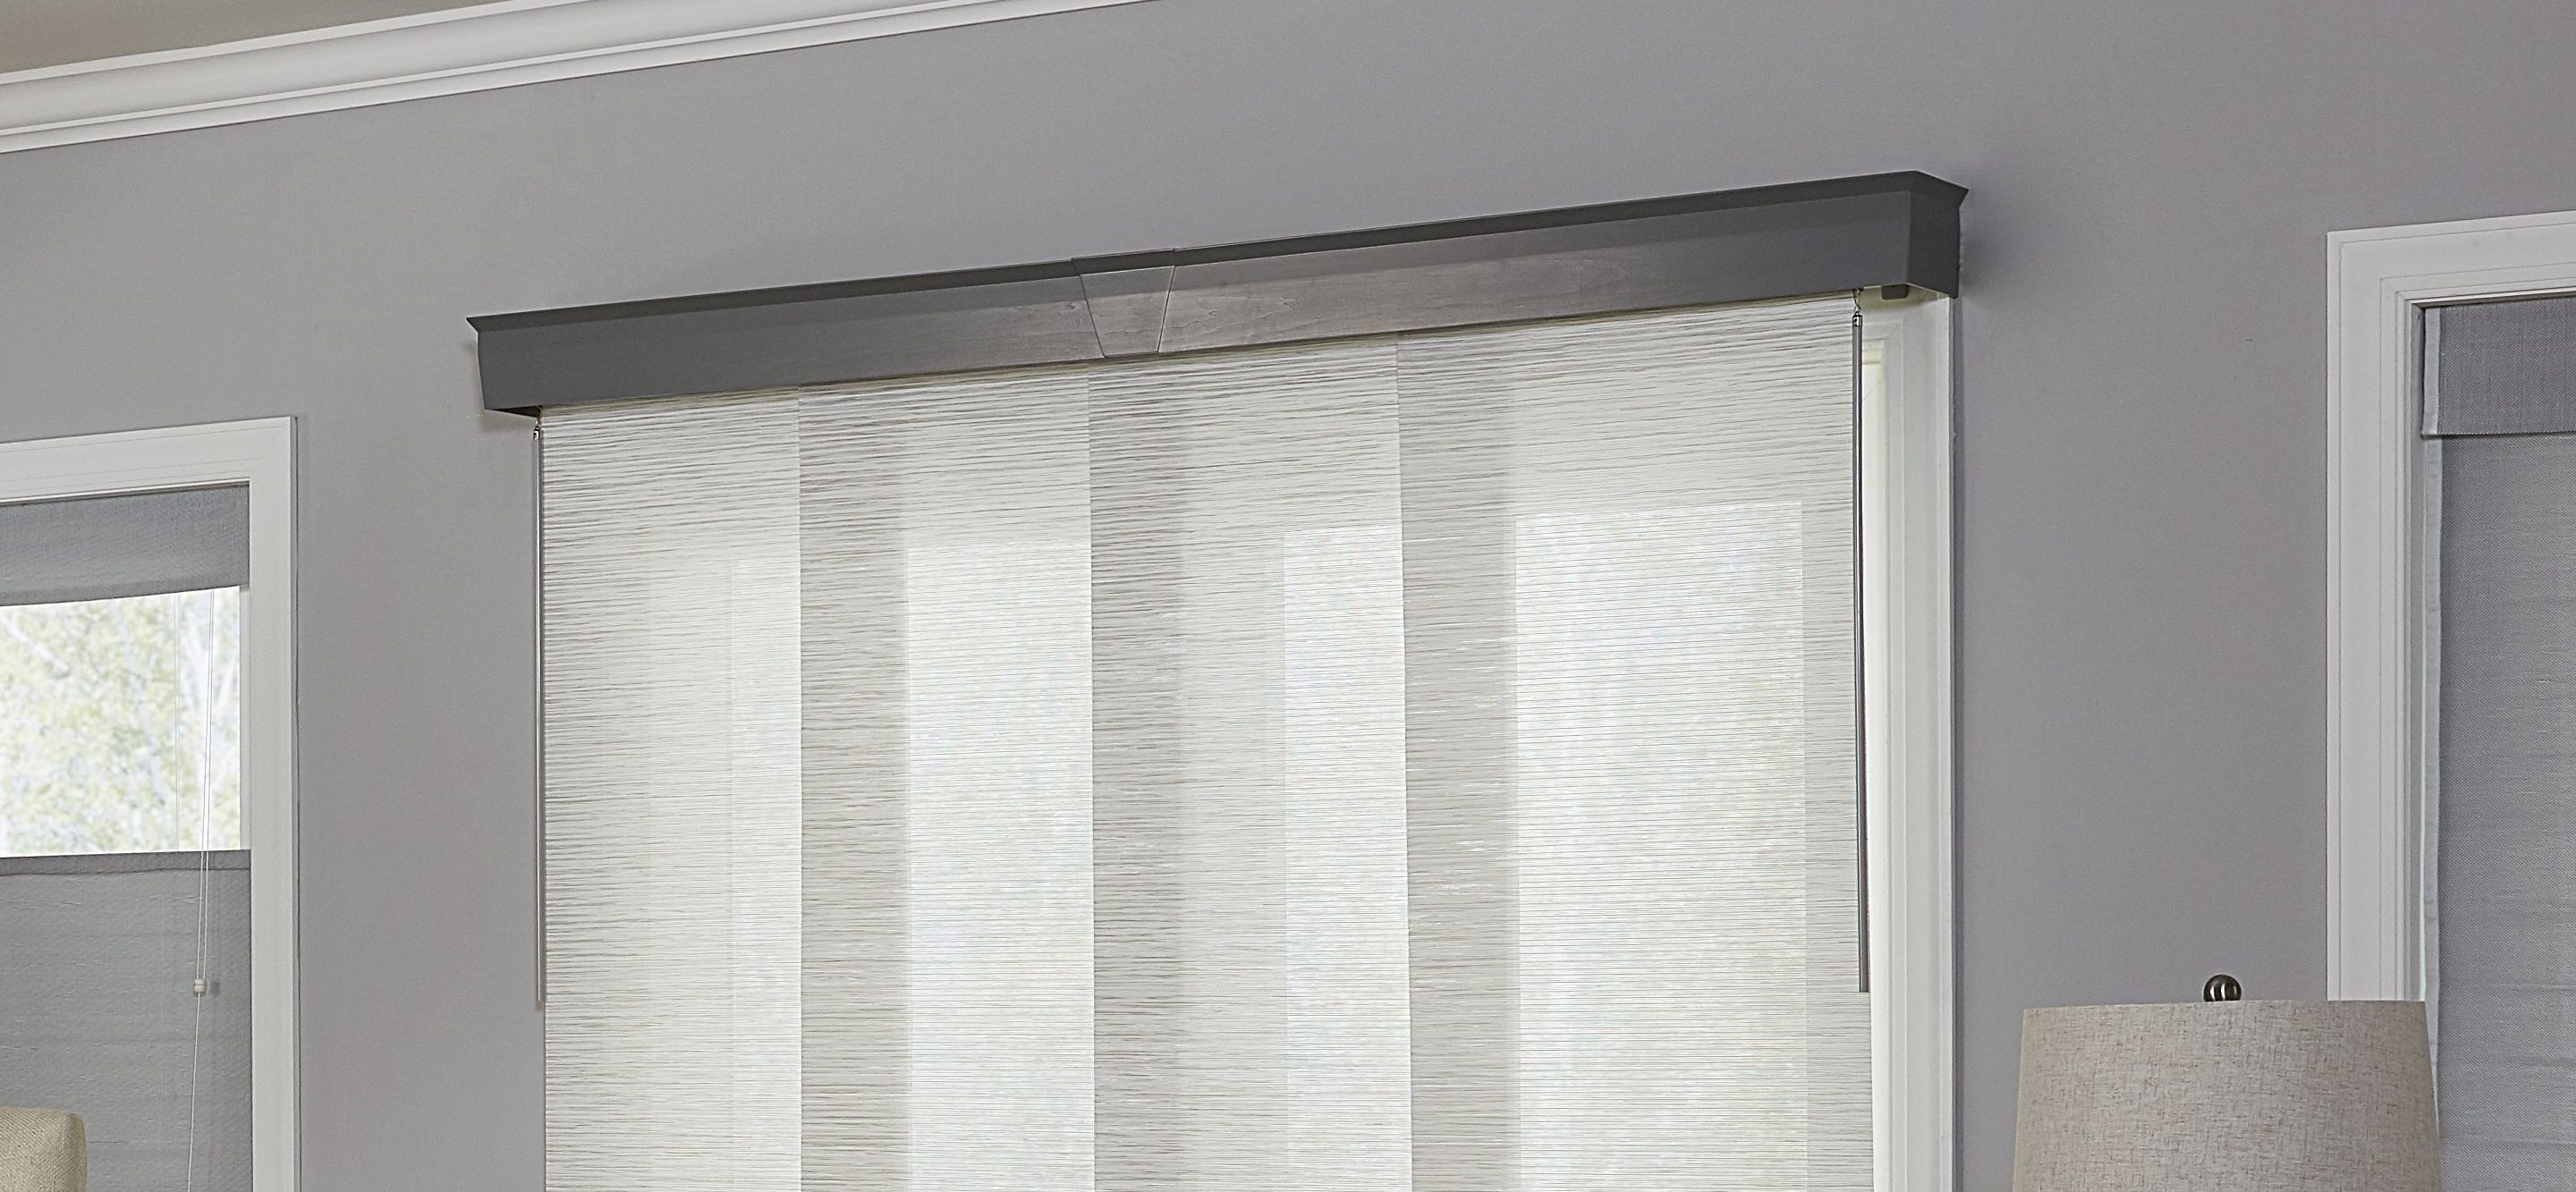 The Best Vertical Blinds Alternatives For Sliding Glass Doors with regard to dimensions 2880 X 1333